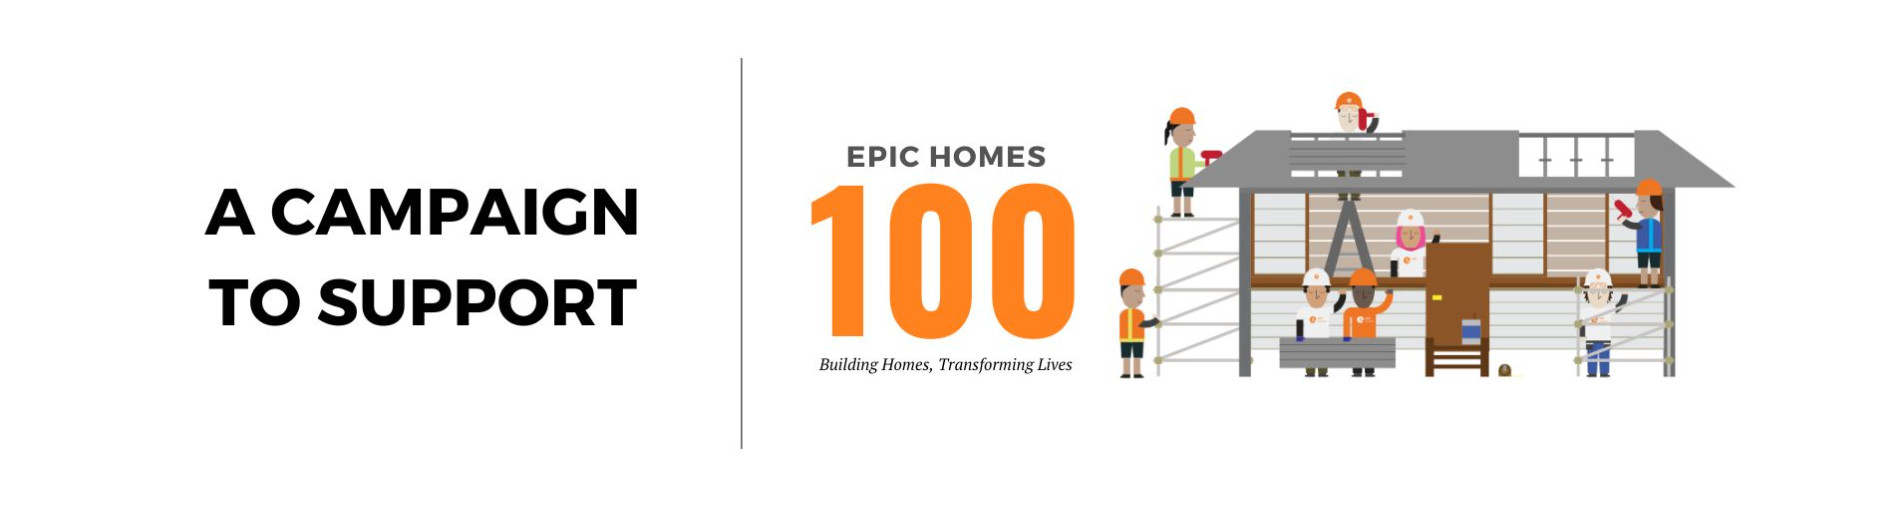 Building epic homes with EPIC Homes